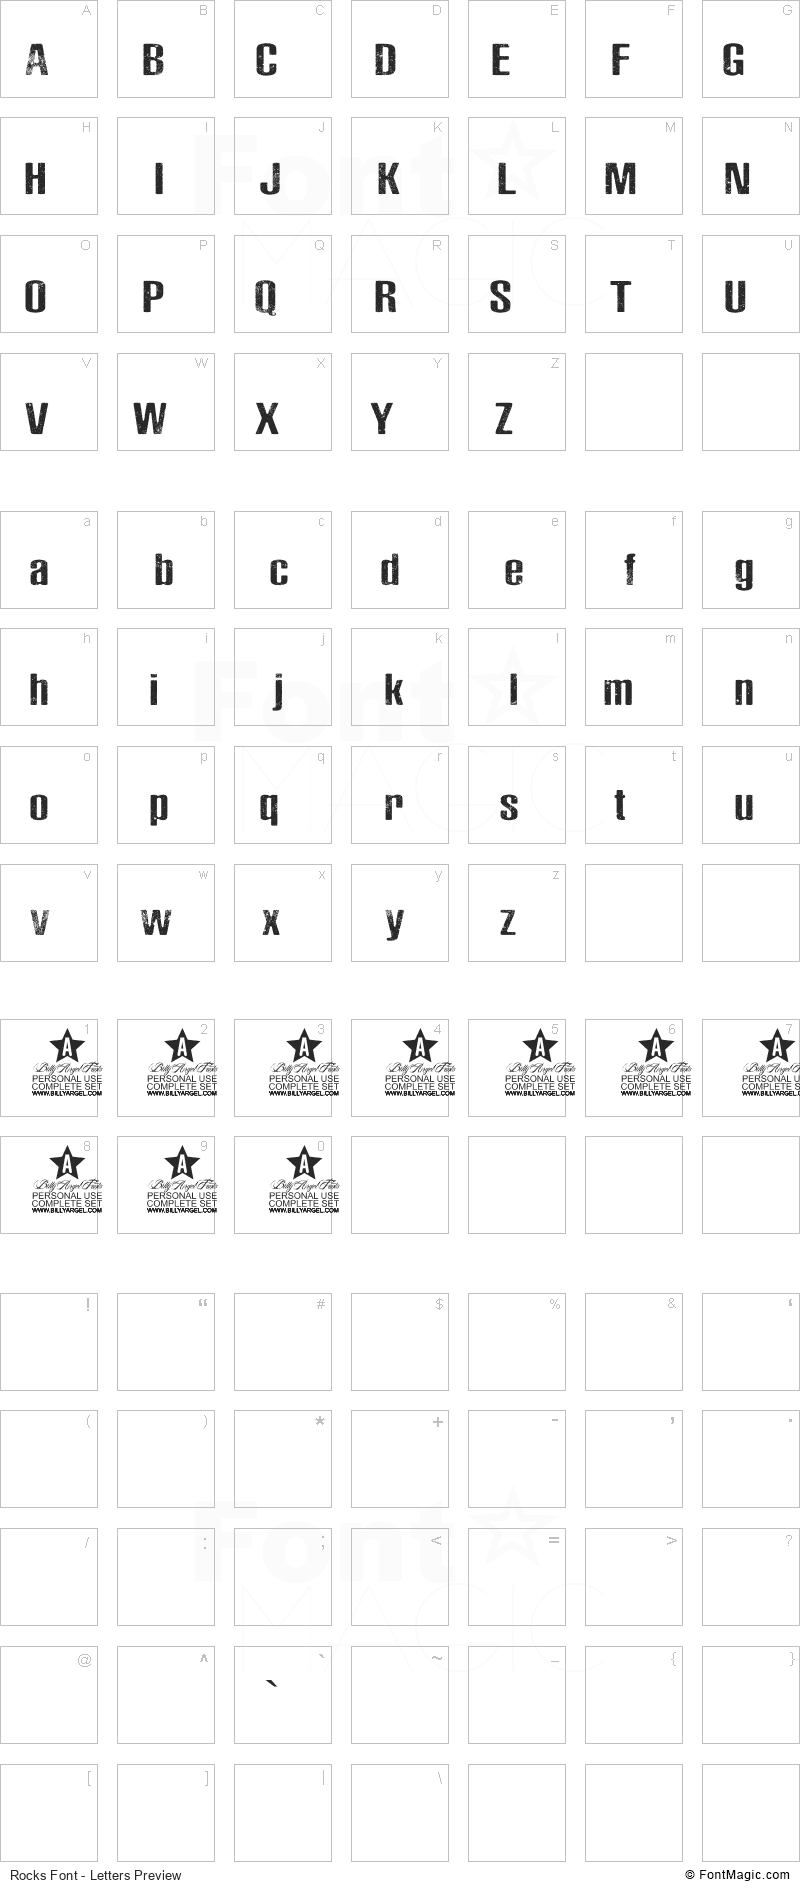 Rocks Font - All Latters Preview Chart